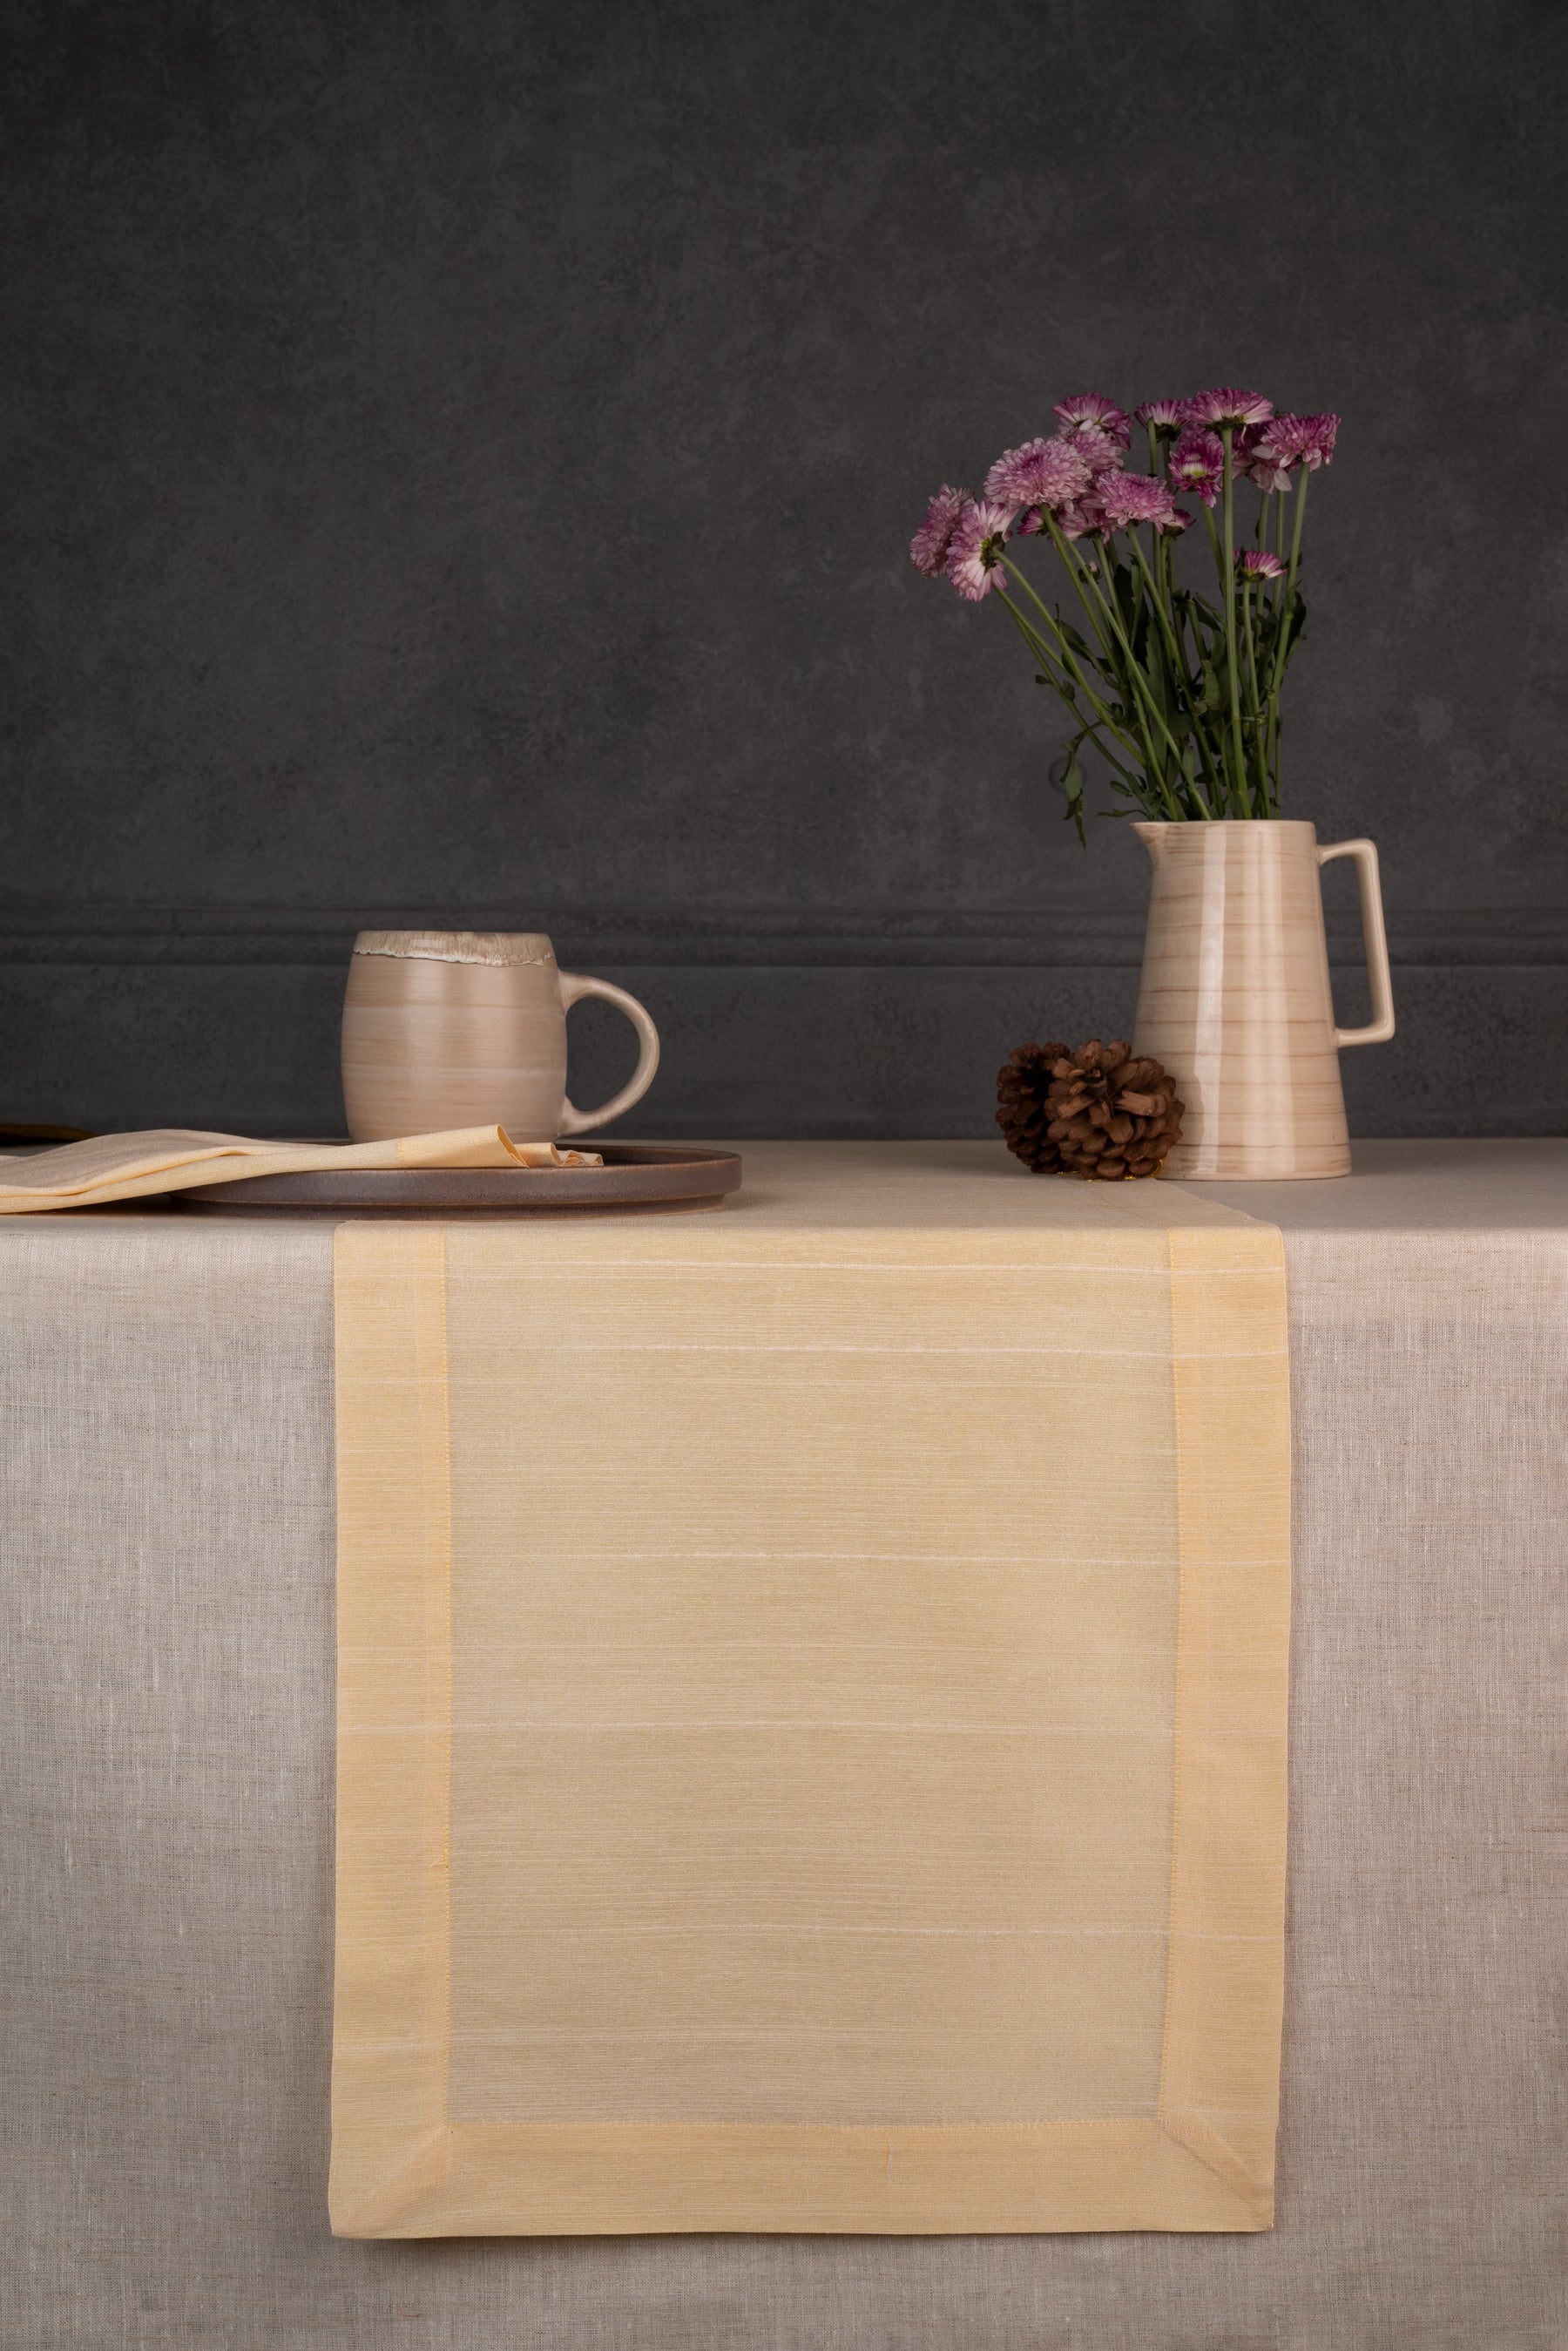 Cream Raw Silk Look Recycled Fabric Table Runner